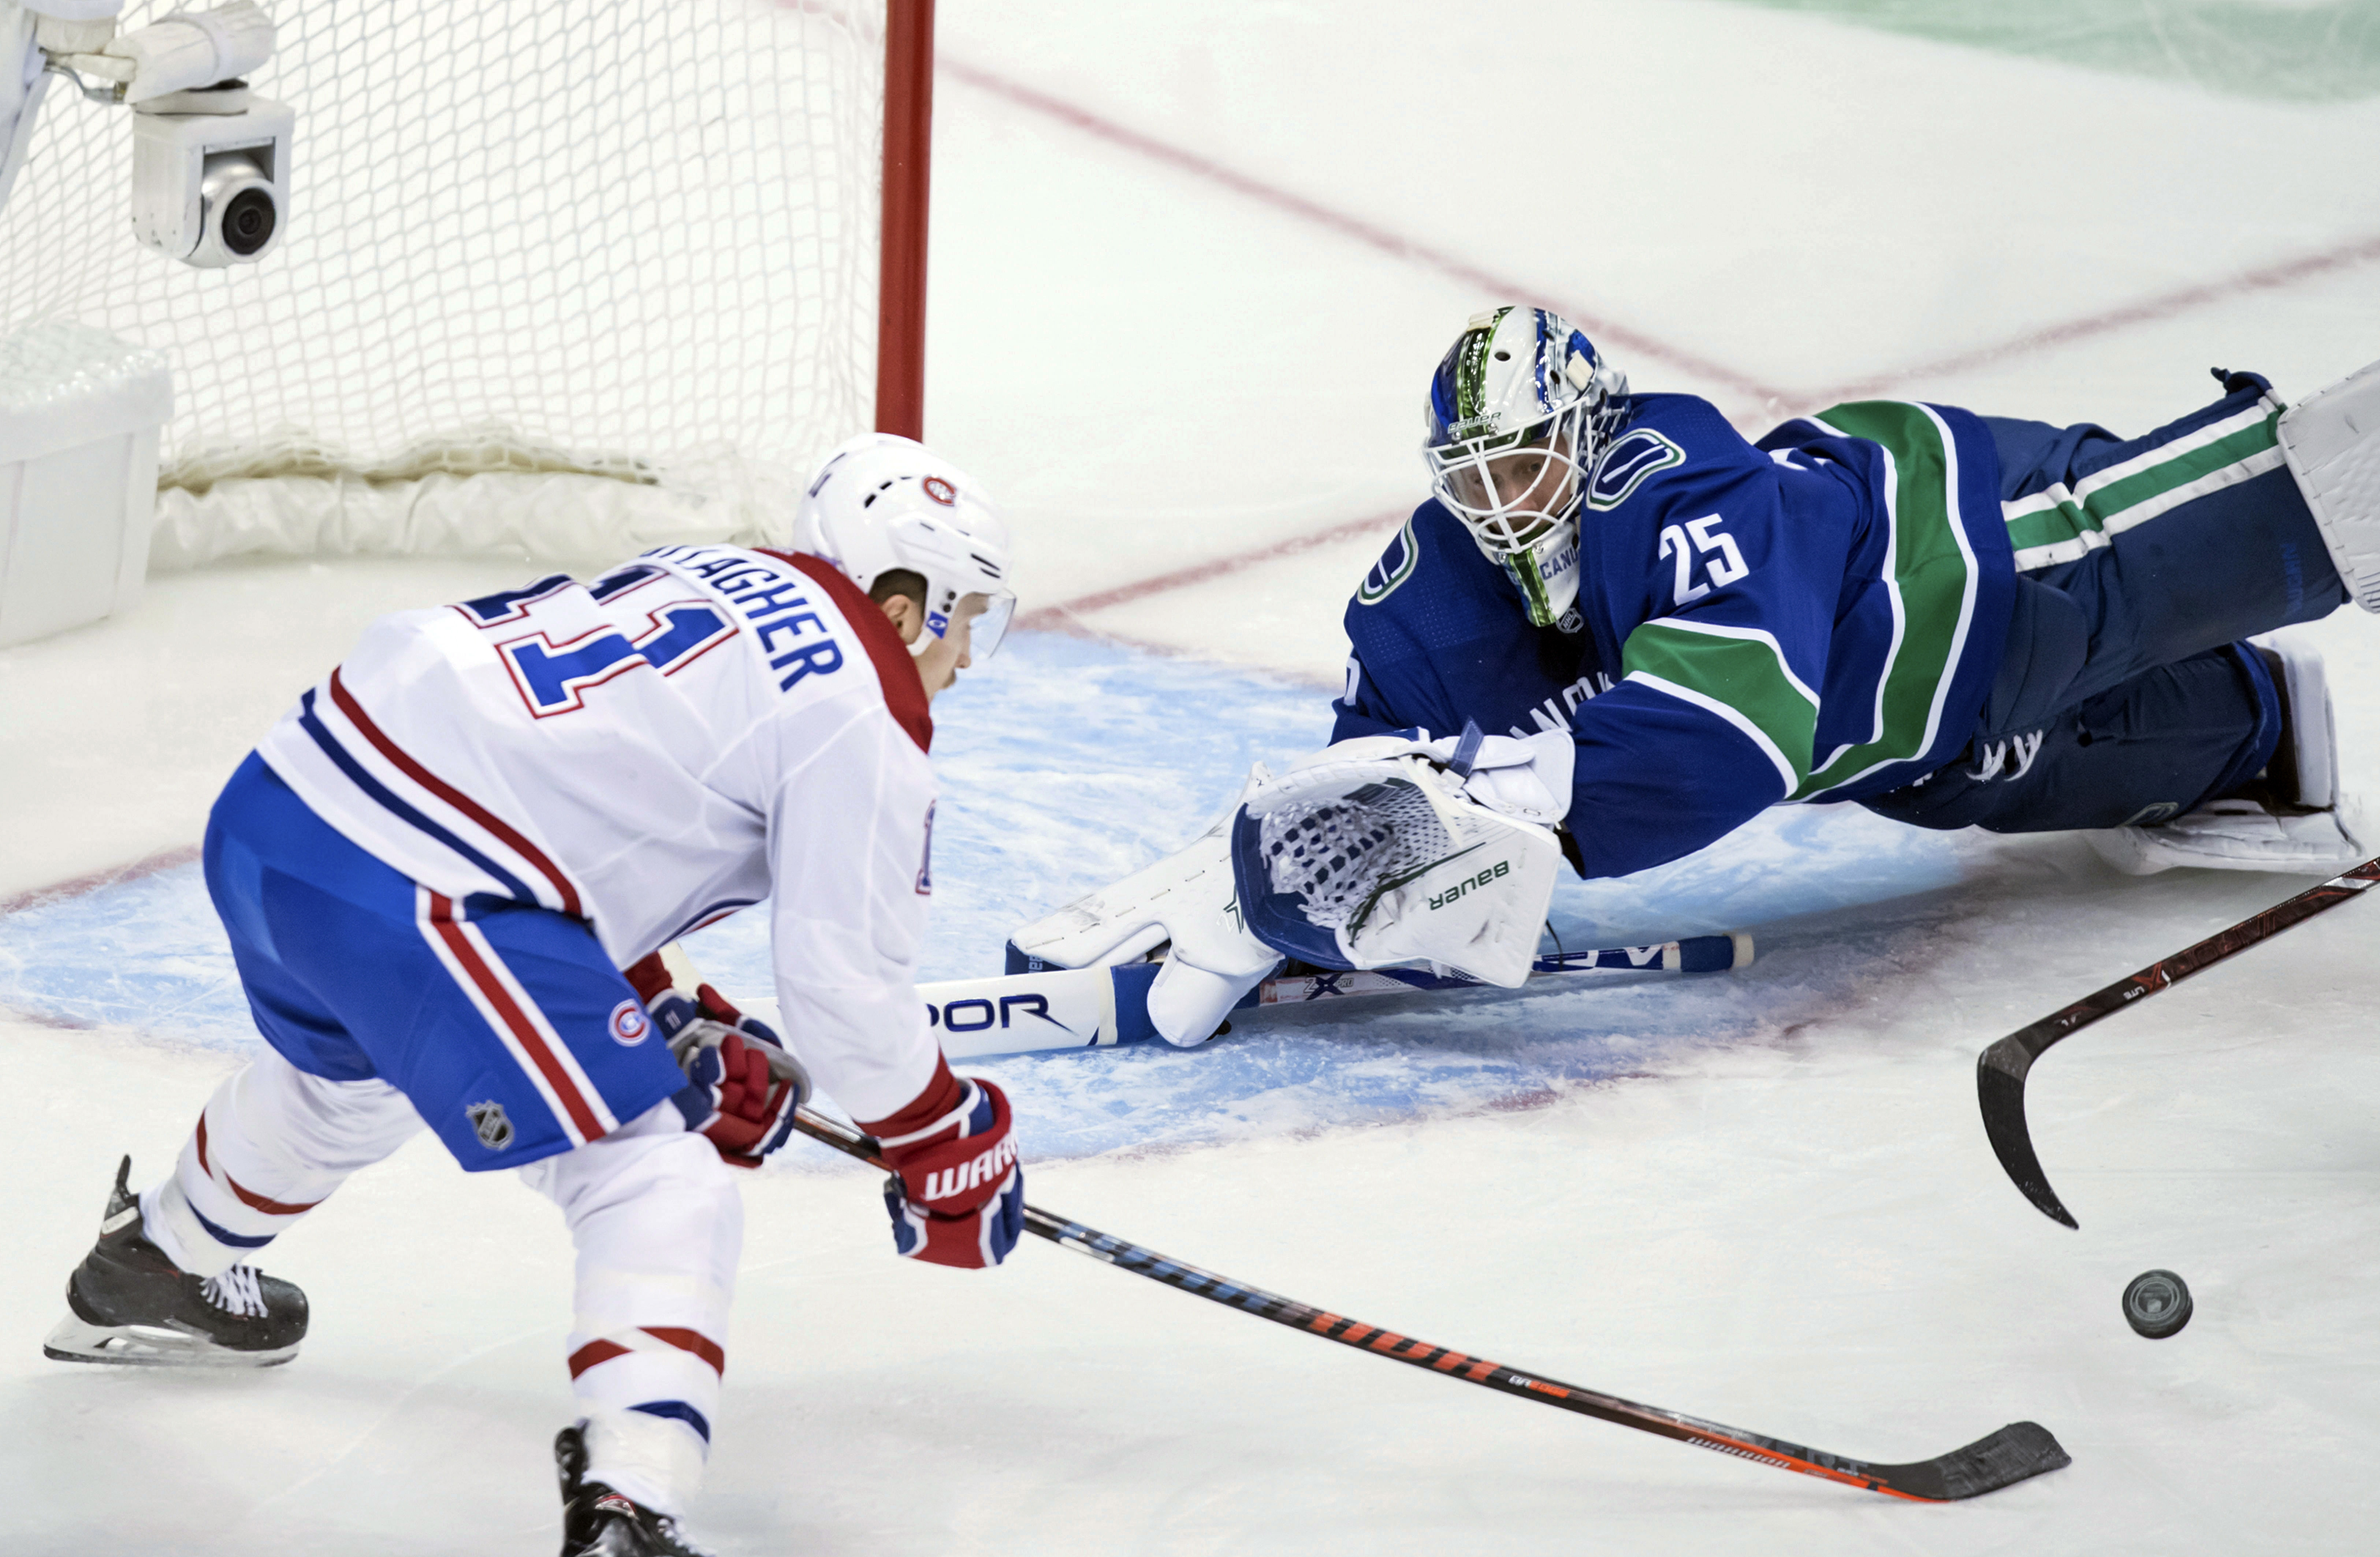 Drouin’s power-play goal sends Canadiens past Canucks 3-2